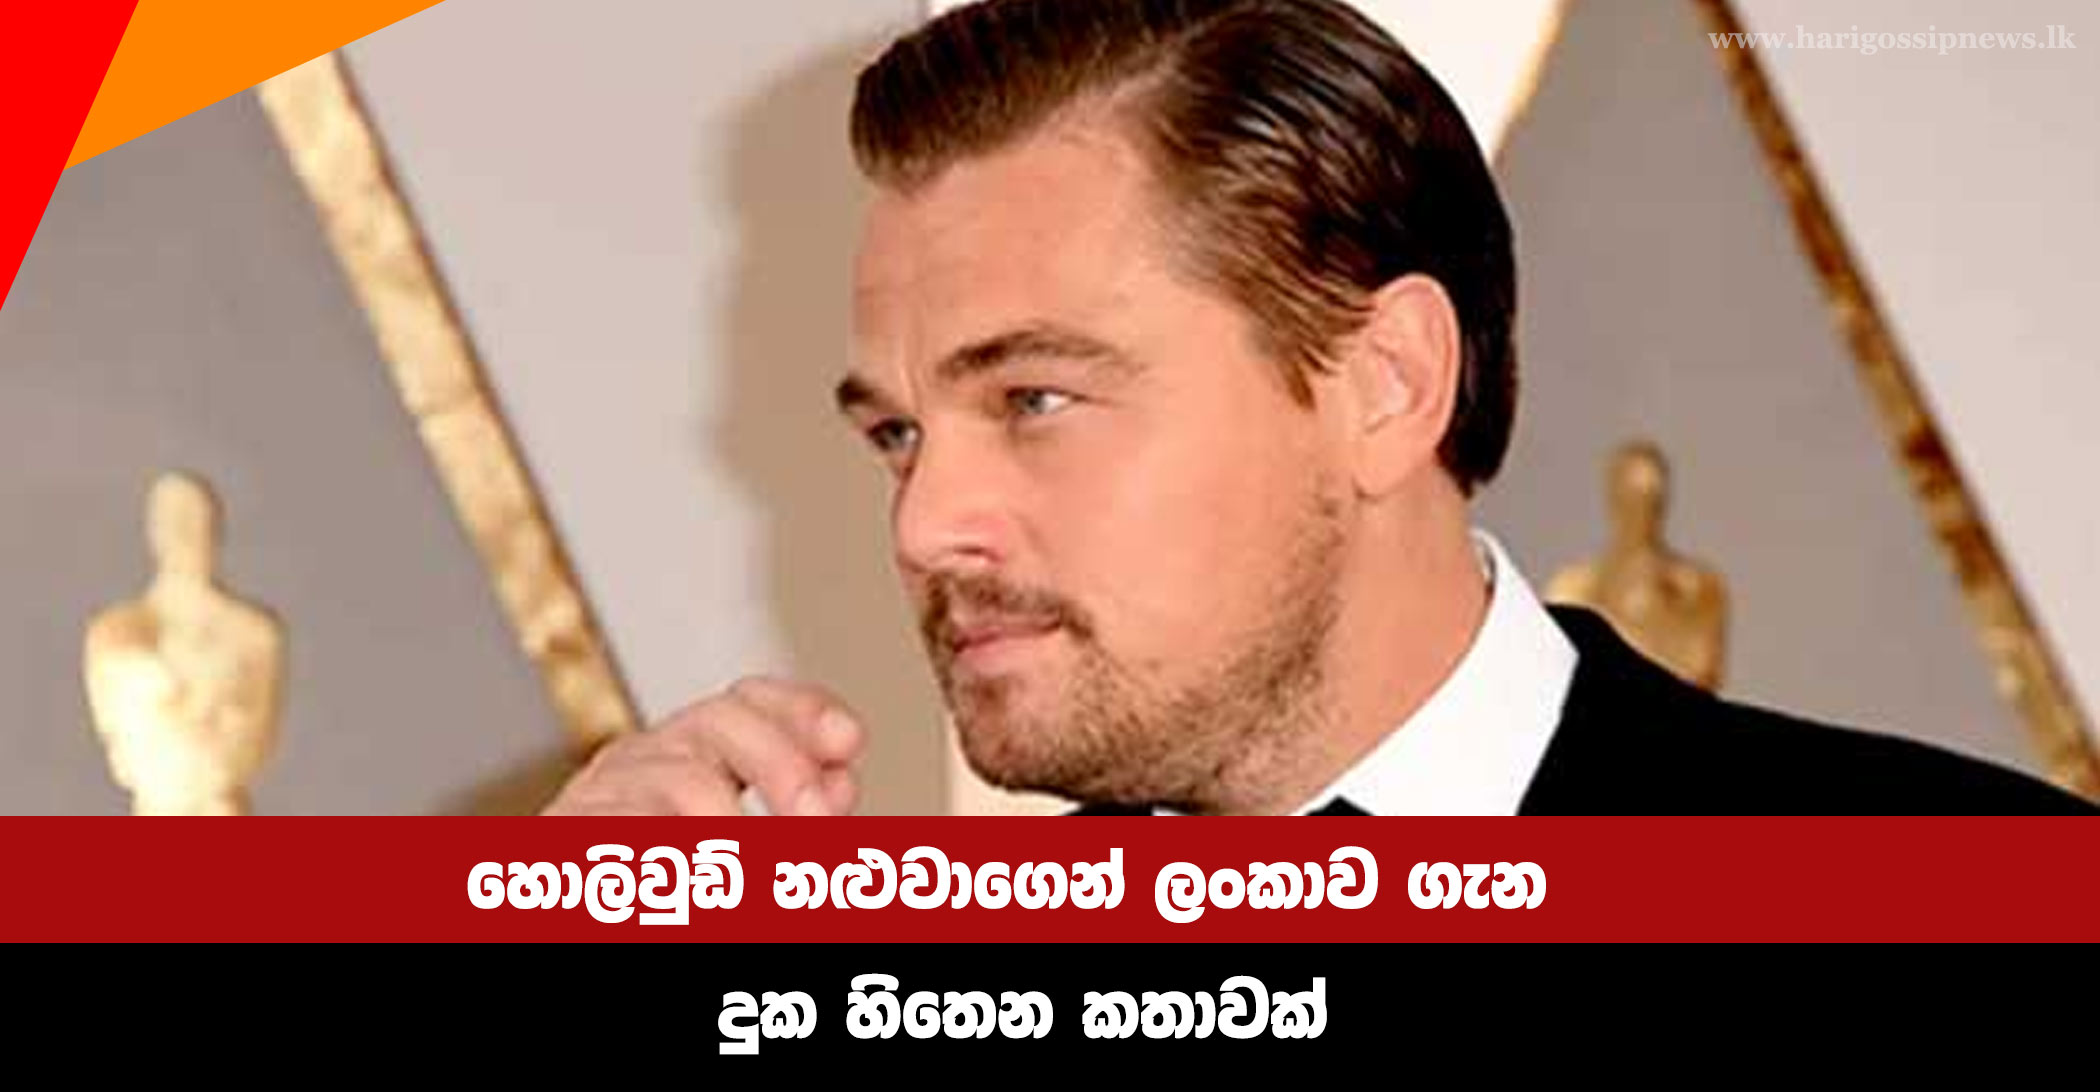 A sad story about Sri Lanka from a Hollywood actor